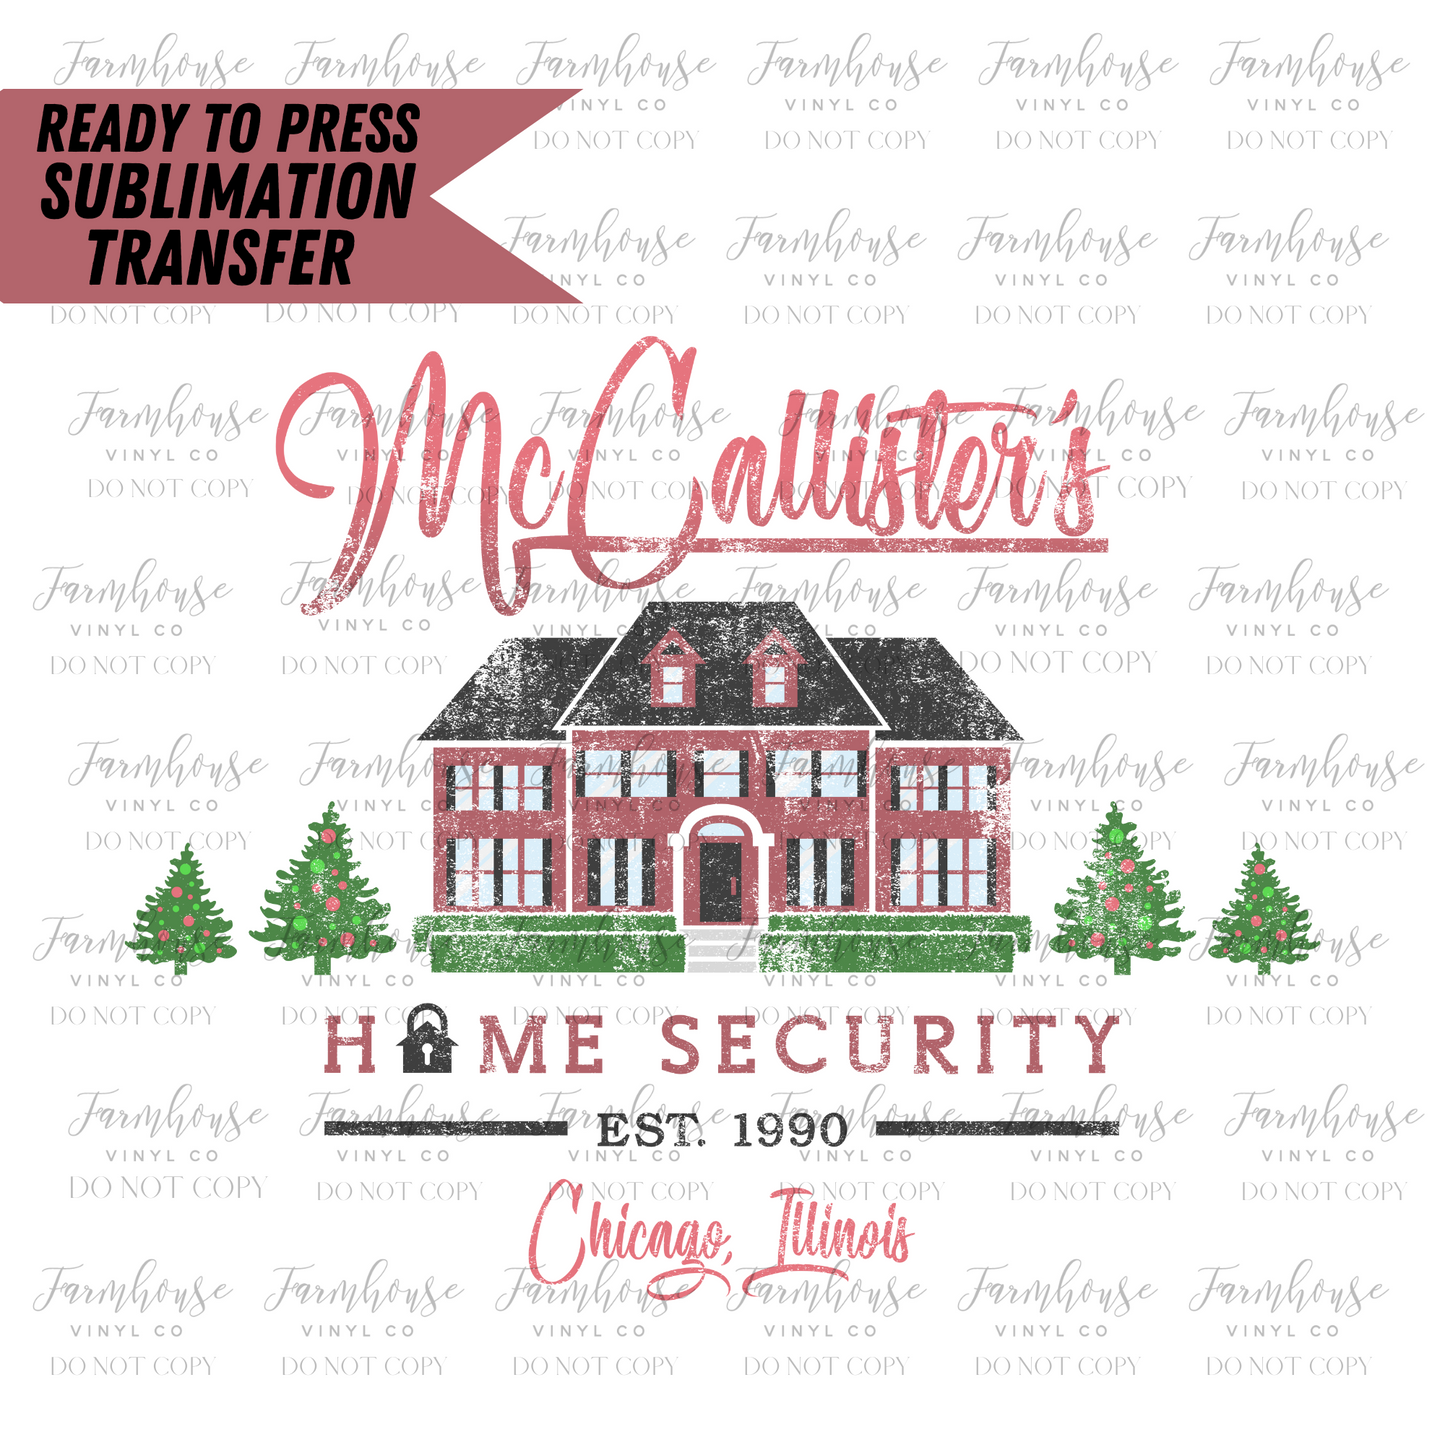 Mccallisters Home Security  Ready To Press Sublimation Transfer Design - Farmhouse Vinyl Co